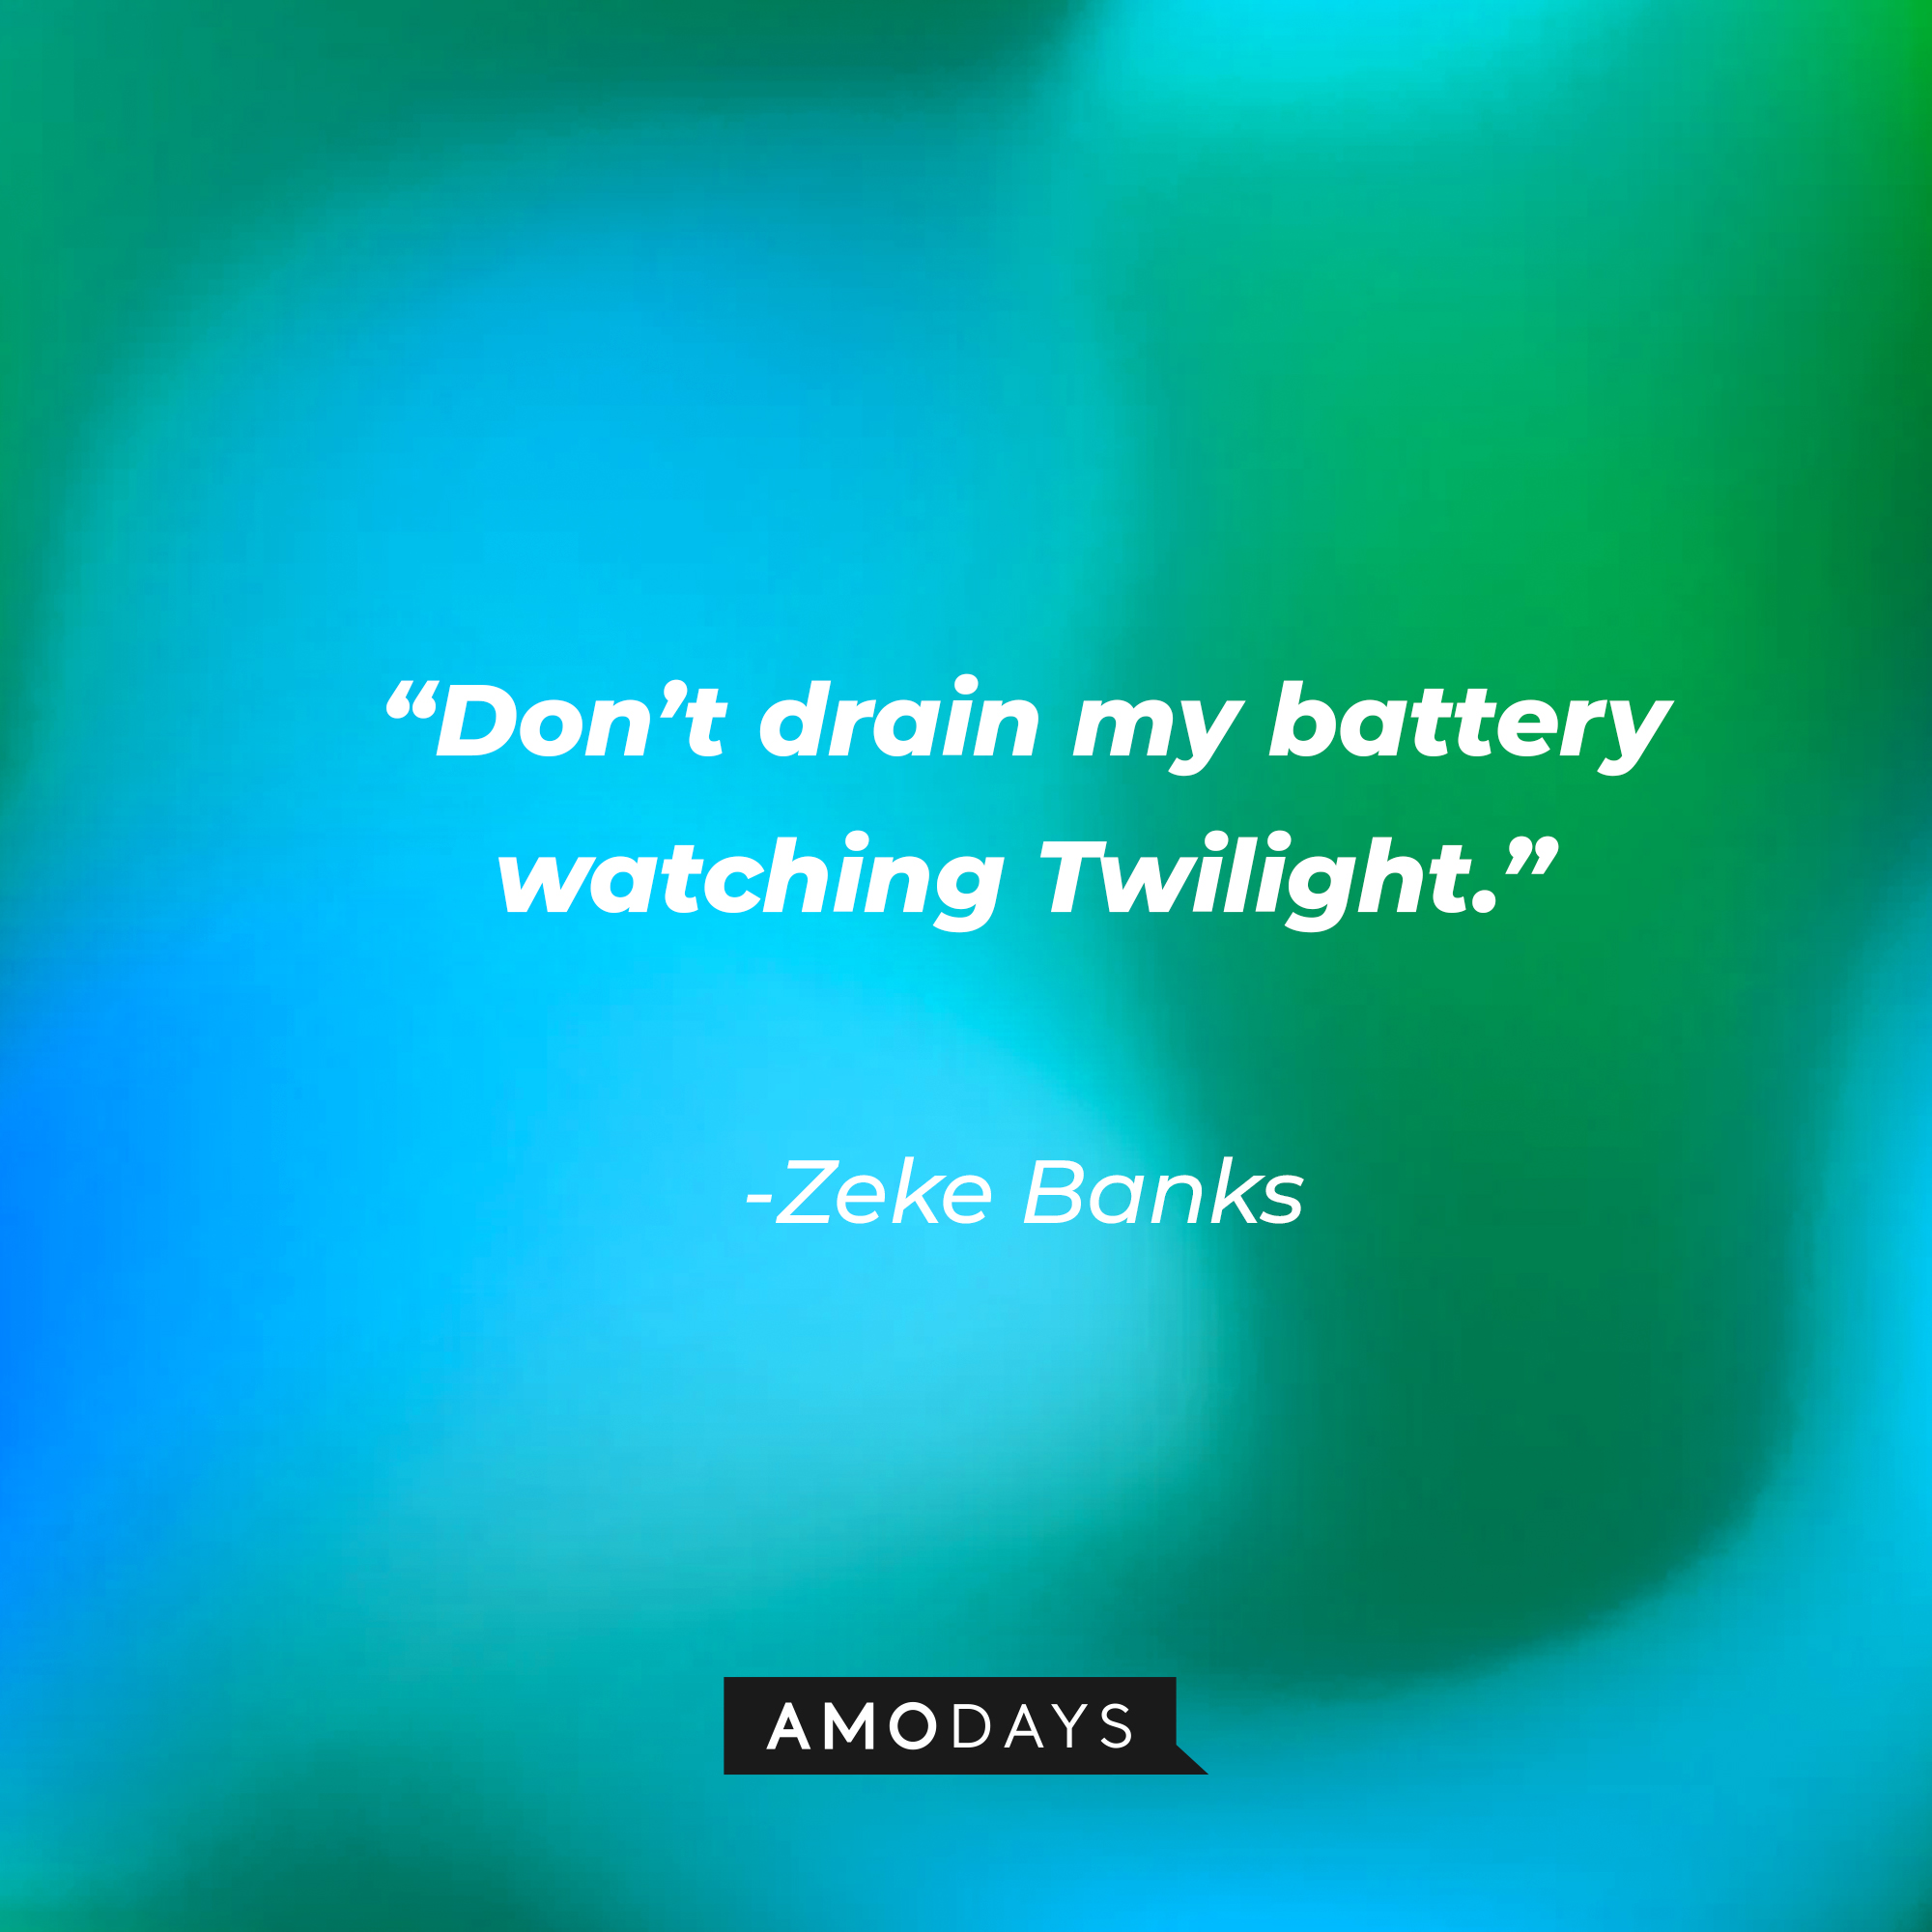 Zeke Banks's quote: “Don’t drain my battery watching Twilight.” | Source: Amodays